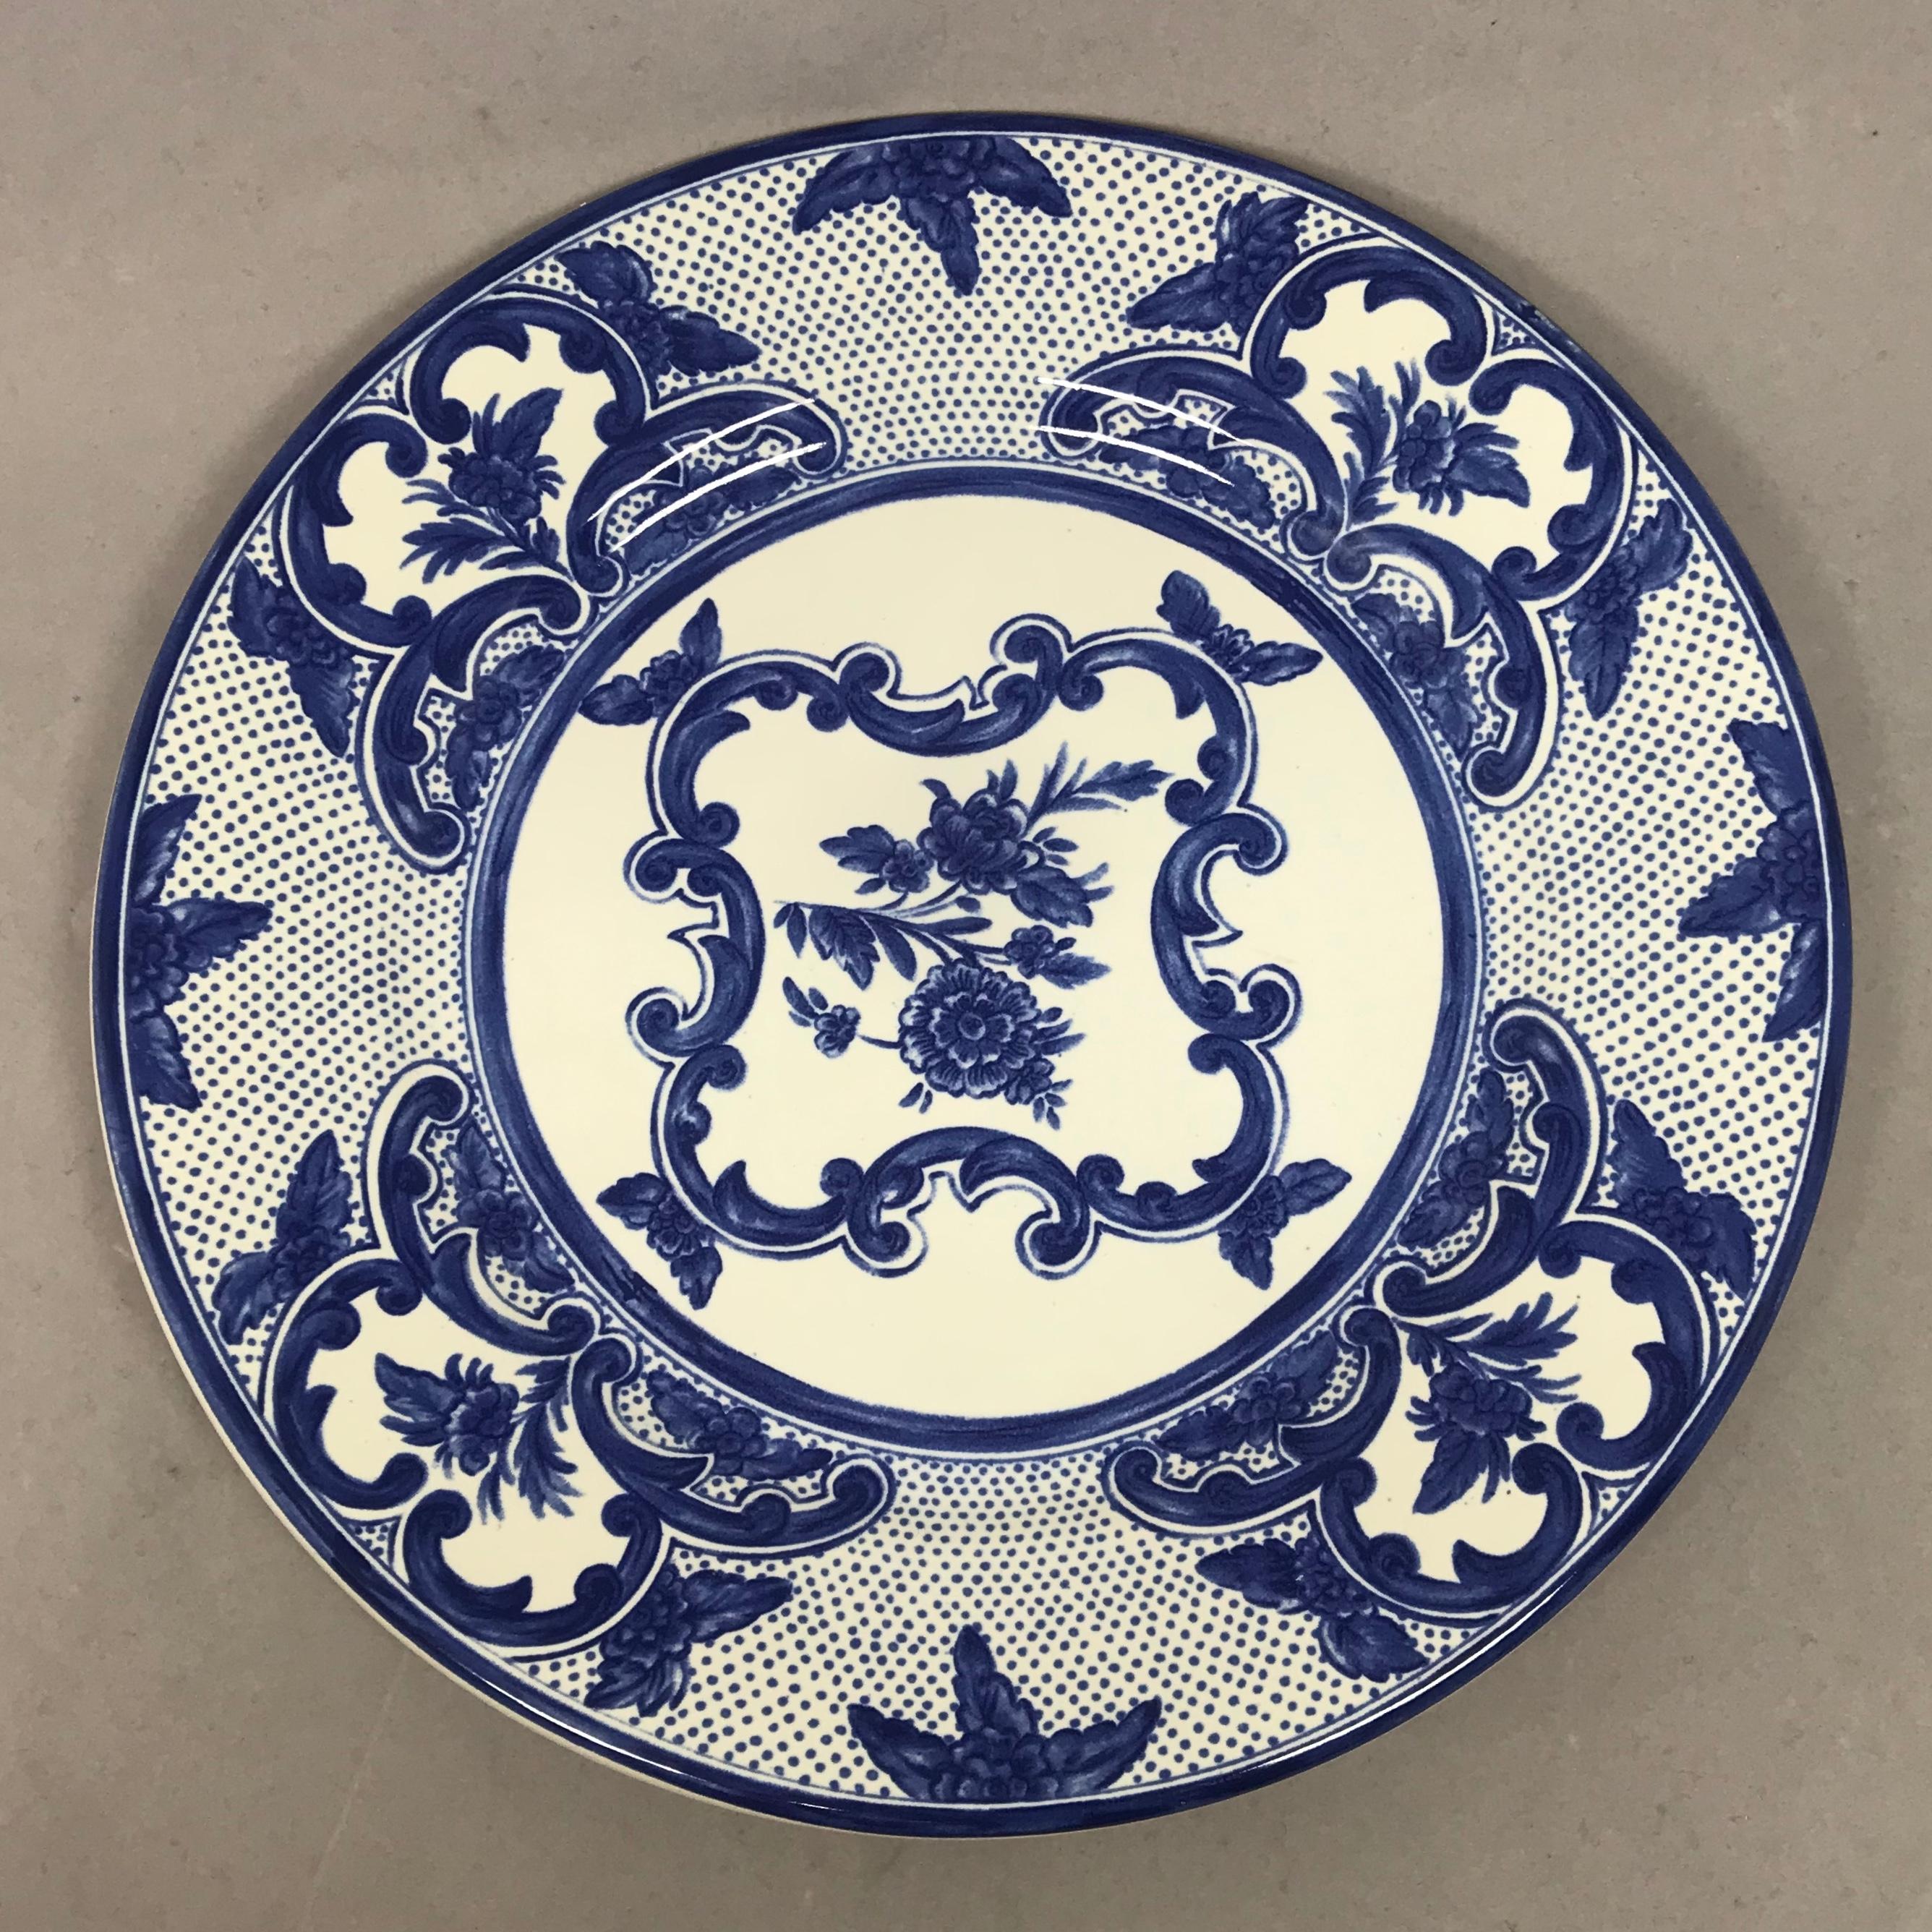 Set of four blue and white Tiffany delft plates. Blue and white ceramic luncheon plates with floral scroll motif, polka dot accents at borders with markings for Tiffany & Co at undersides, Portugal, 1996. 
Dimensions: 8.25